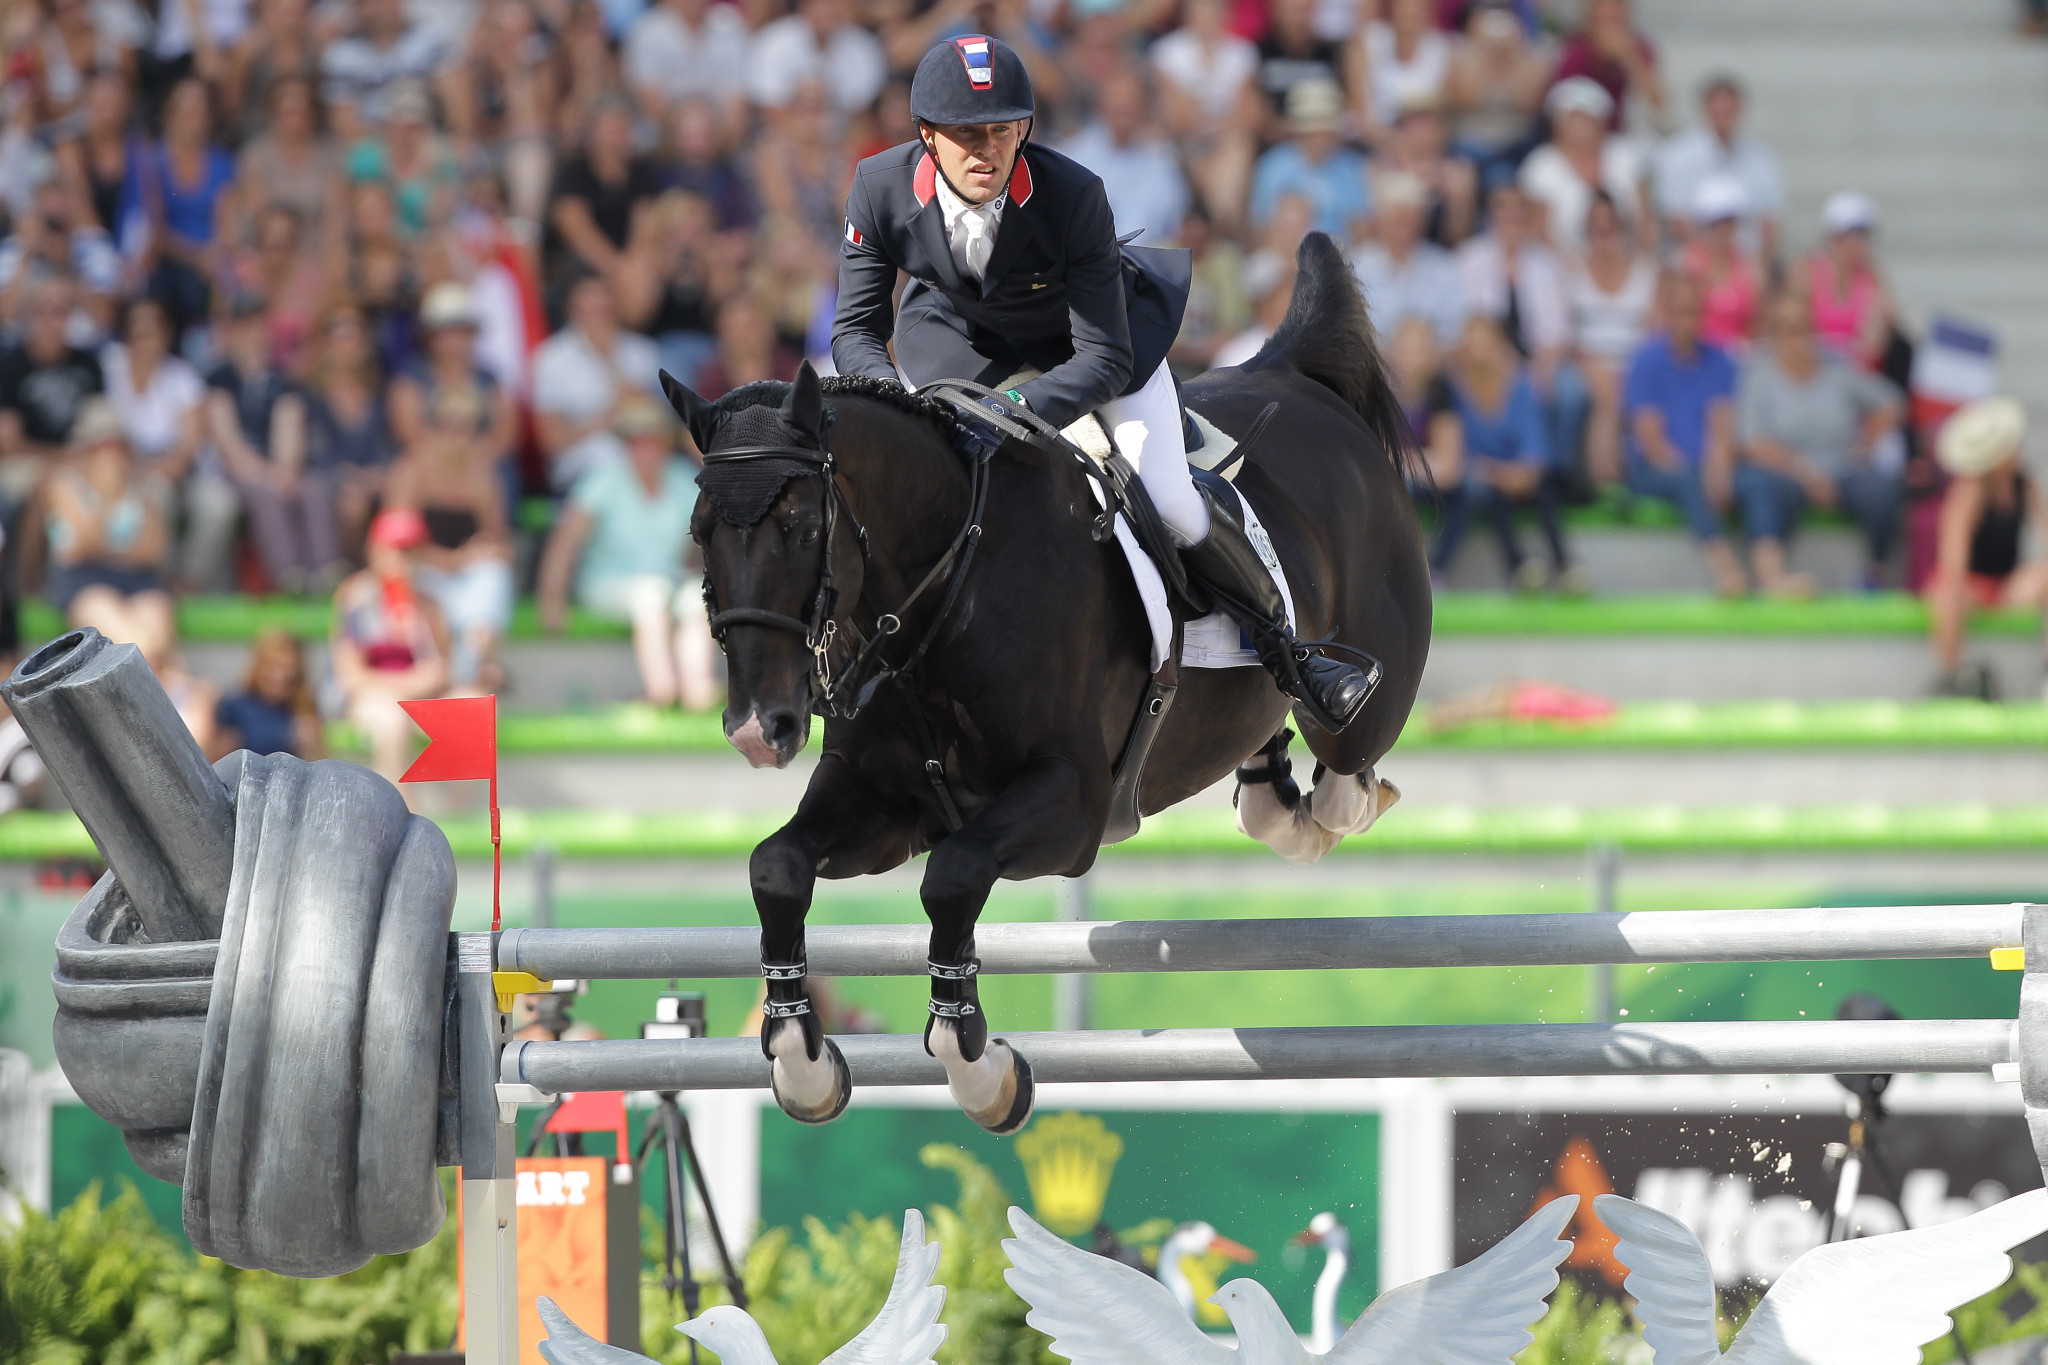 The World Equestrian Games continues to boost the sport's profile ©Getty Images